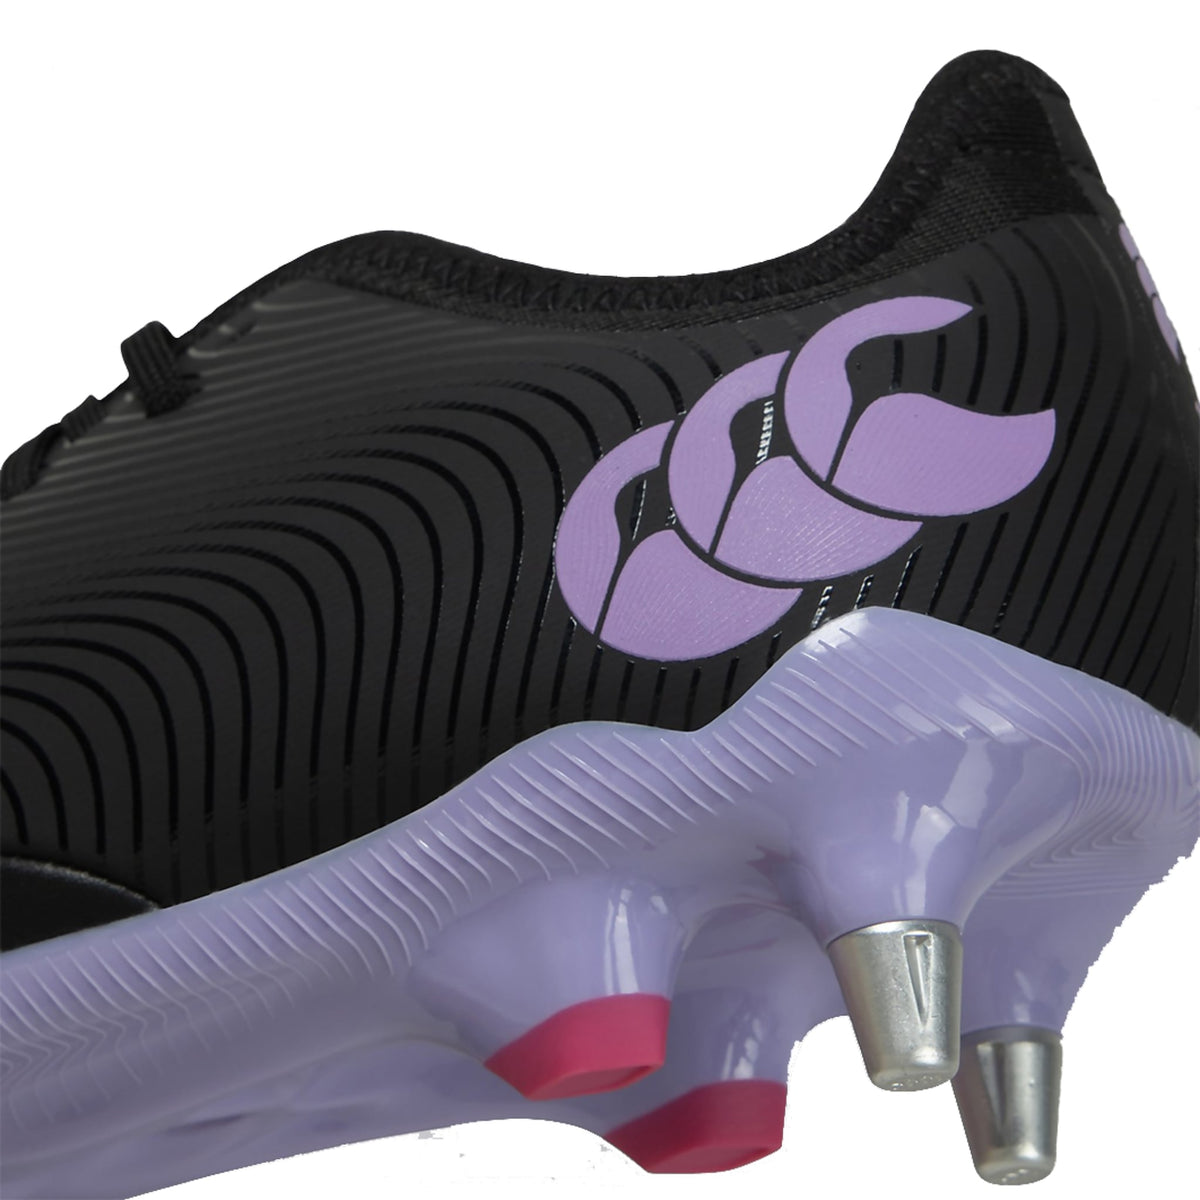 Canterbury Phoenix Genesis Pro SG Boots a High-Performance Quality CCC Rugby Shoe in Black/Purple Available in Unisex sizing 6-16